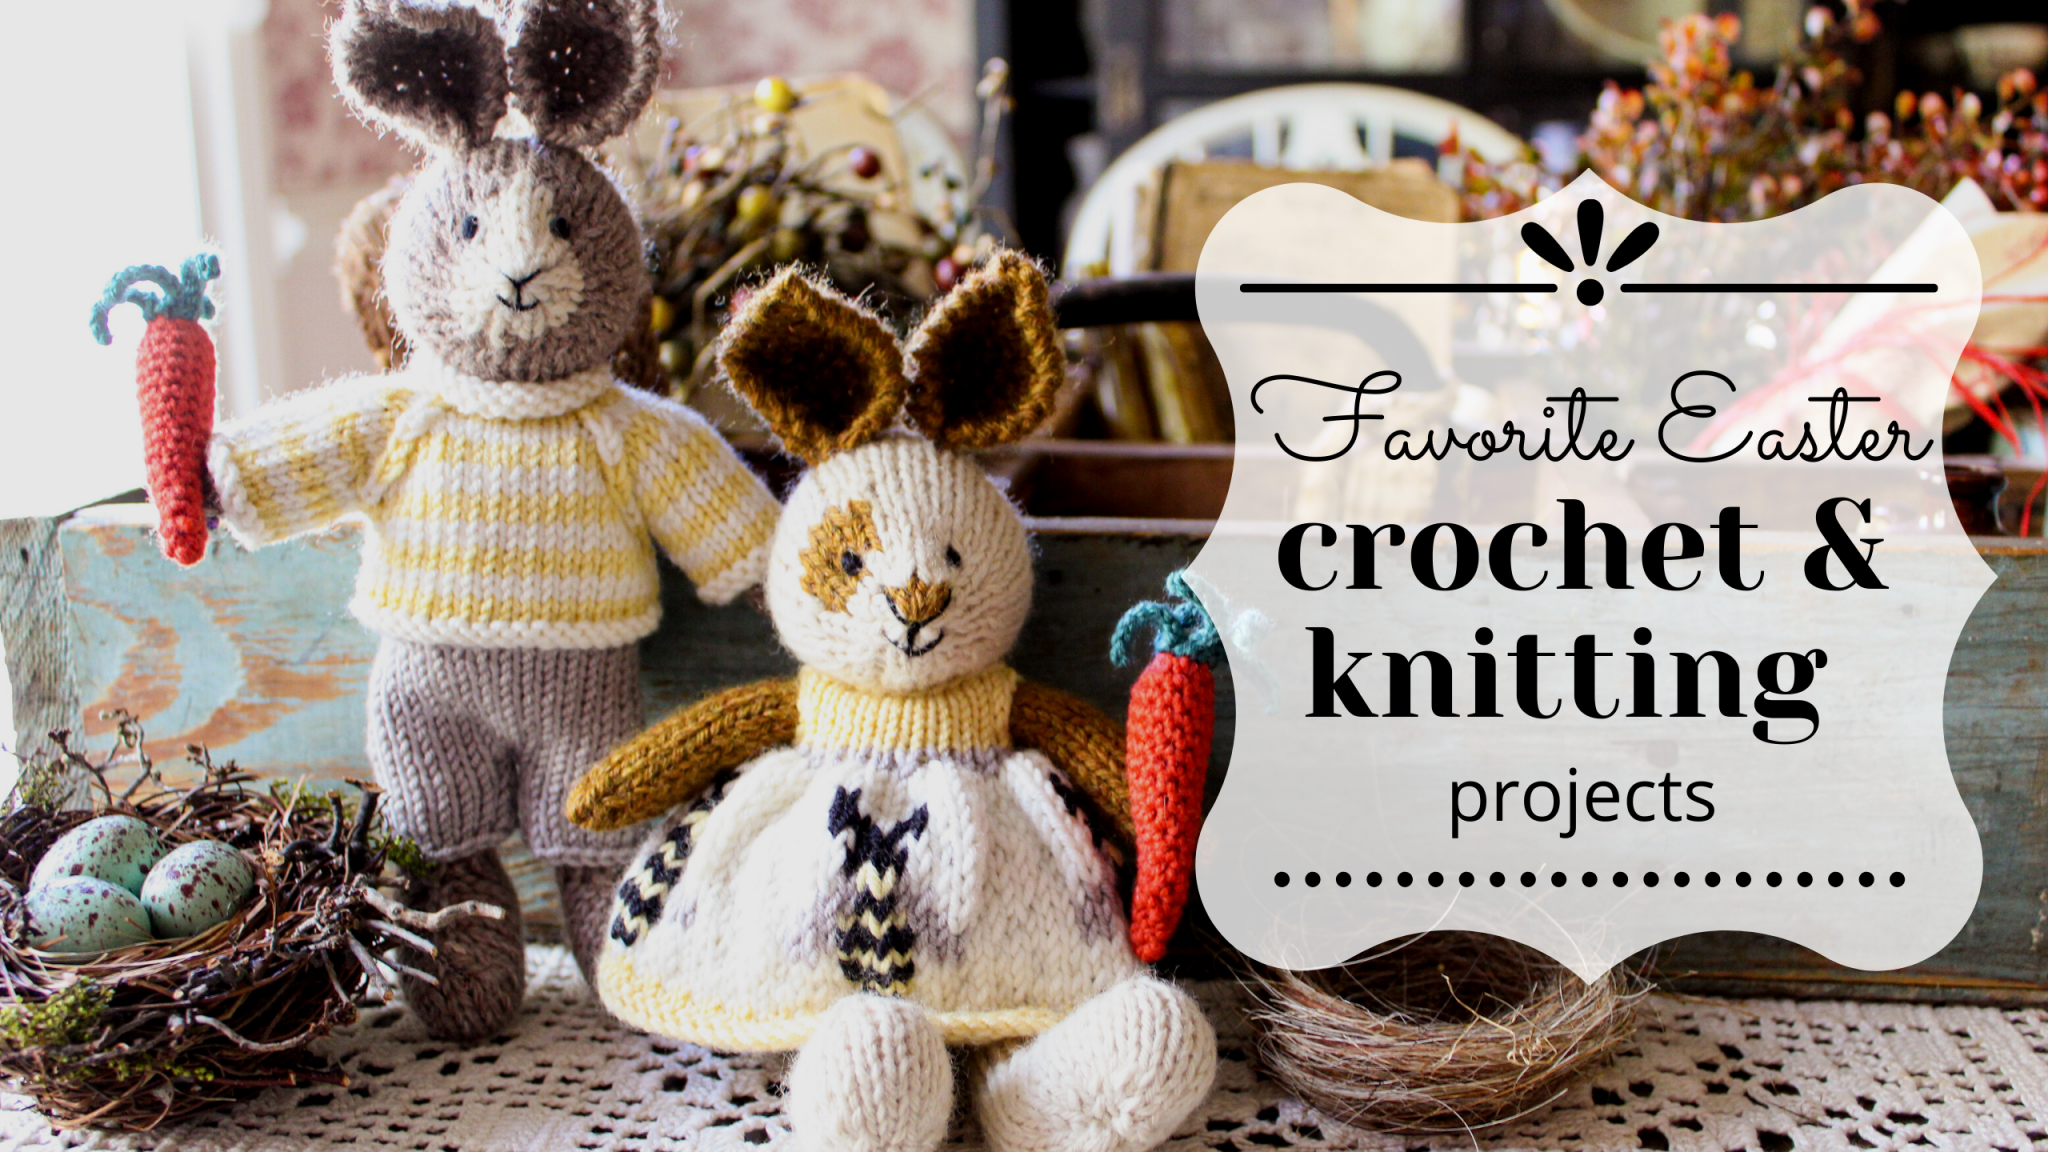 Favorite Knit & Crochet Projects for Easter